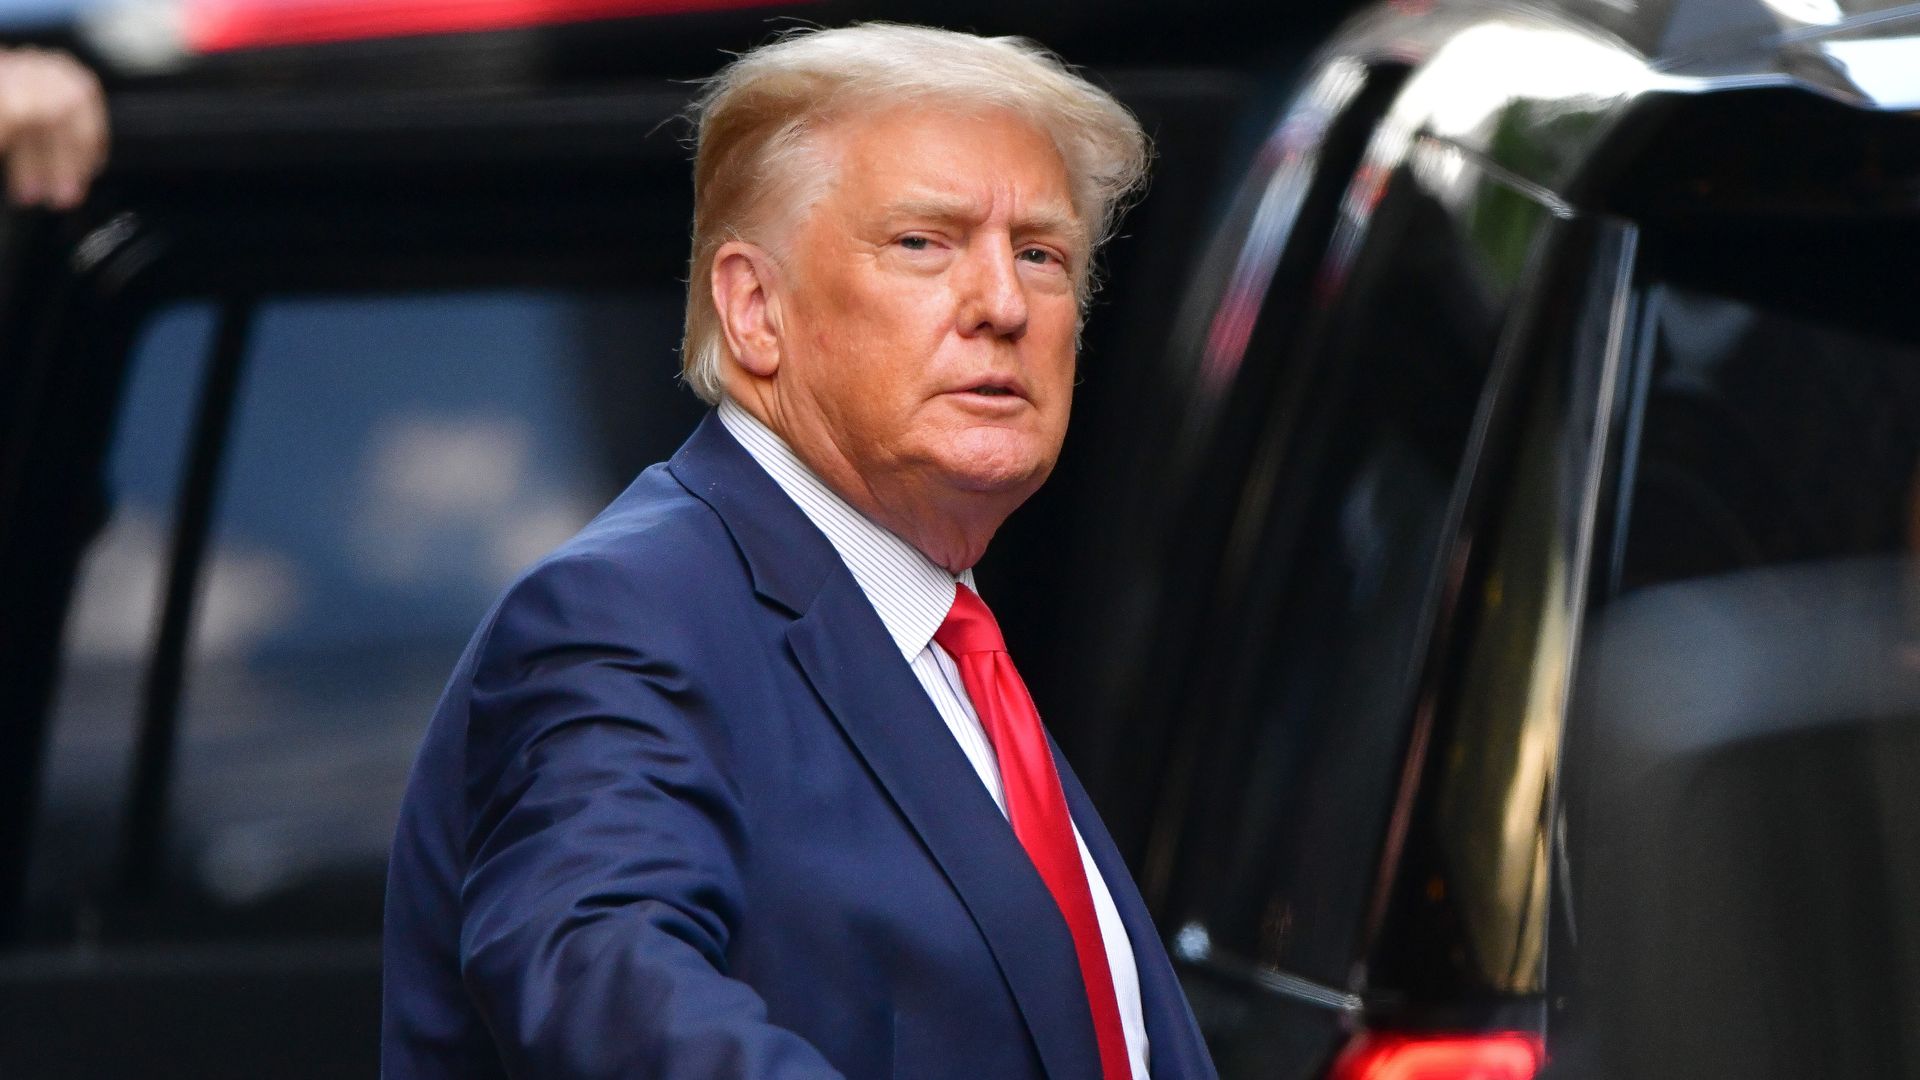 Former U.S. President Donald Trump leaves Trump Tower in Manhattan on May 18, 2021 in New York City. 